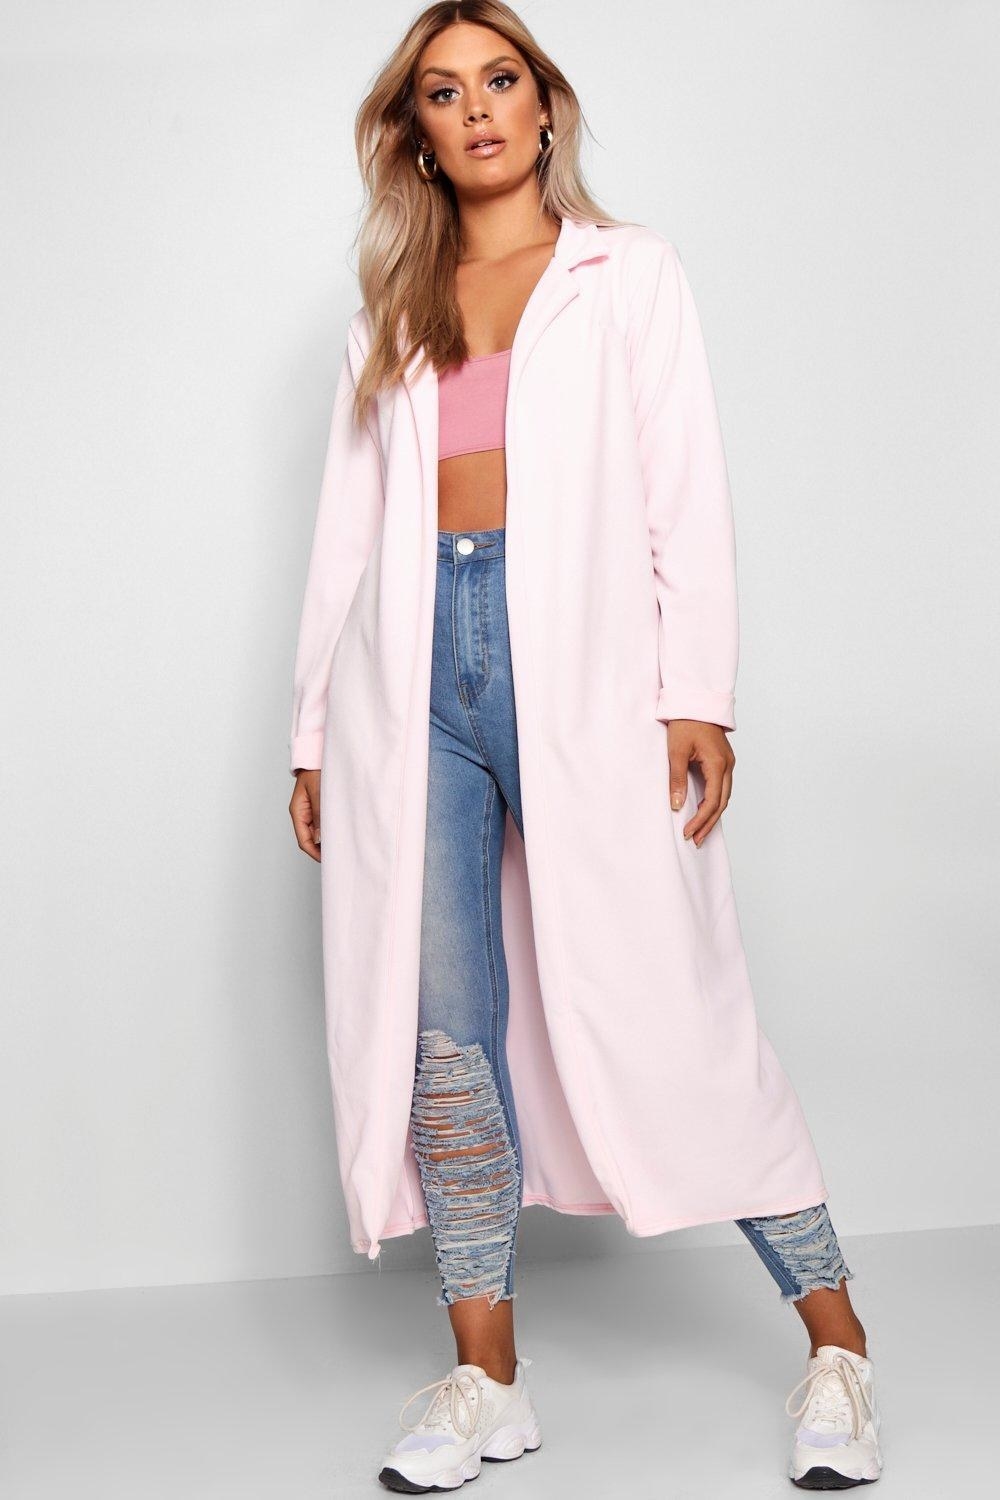 A model wearing the pale pink open duster, which hits at their calves